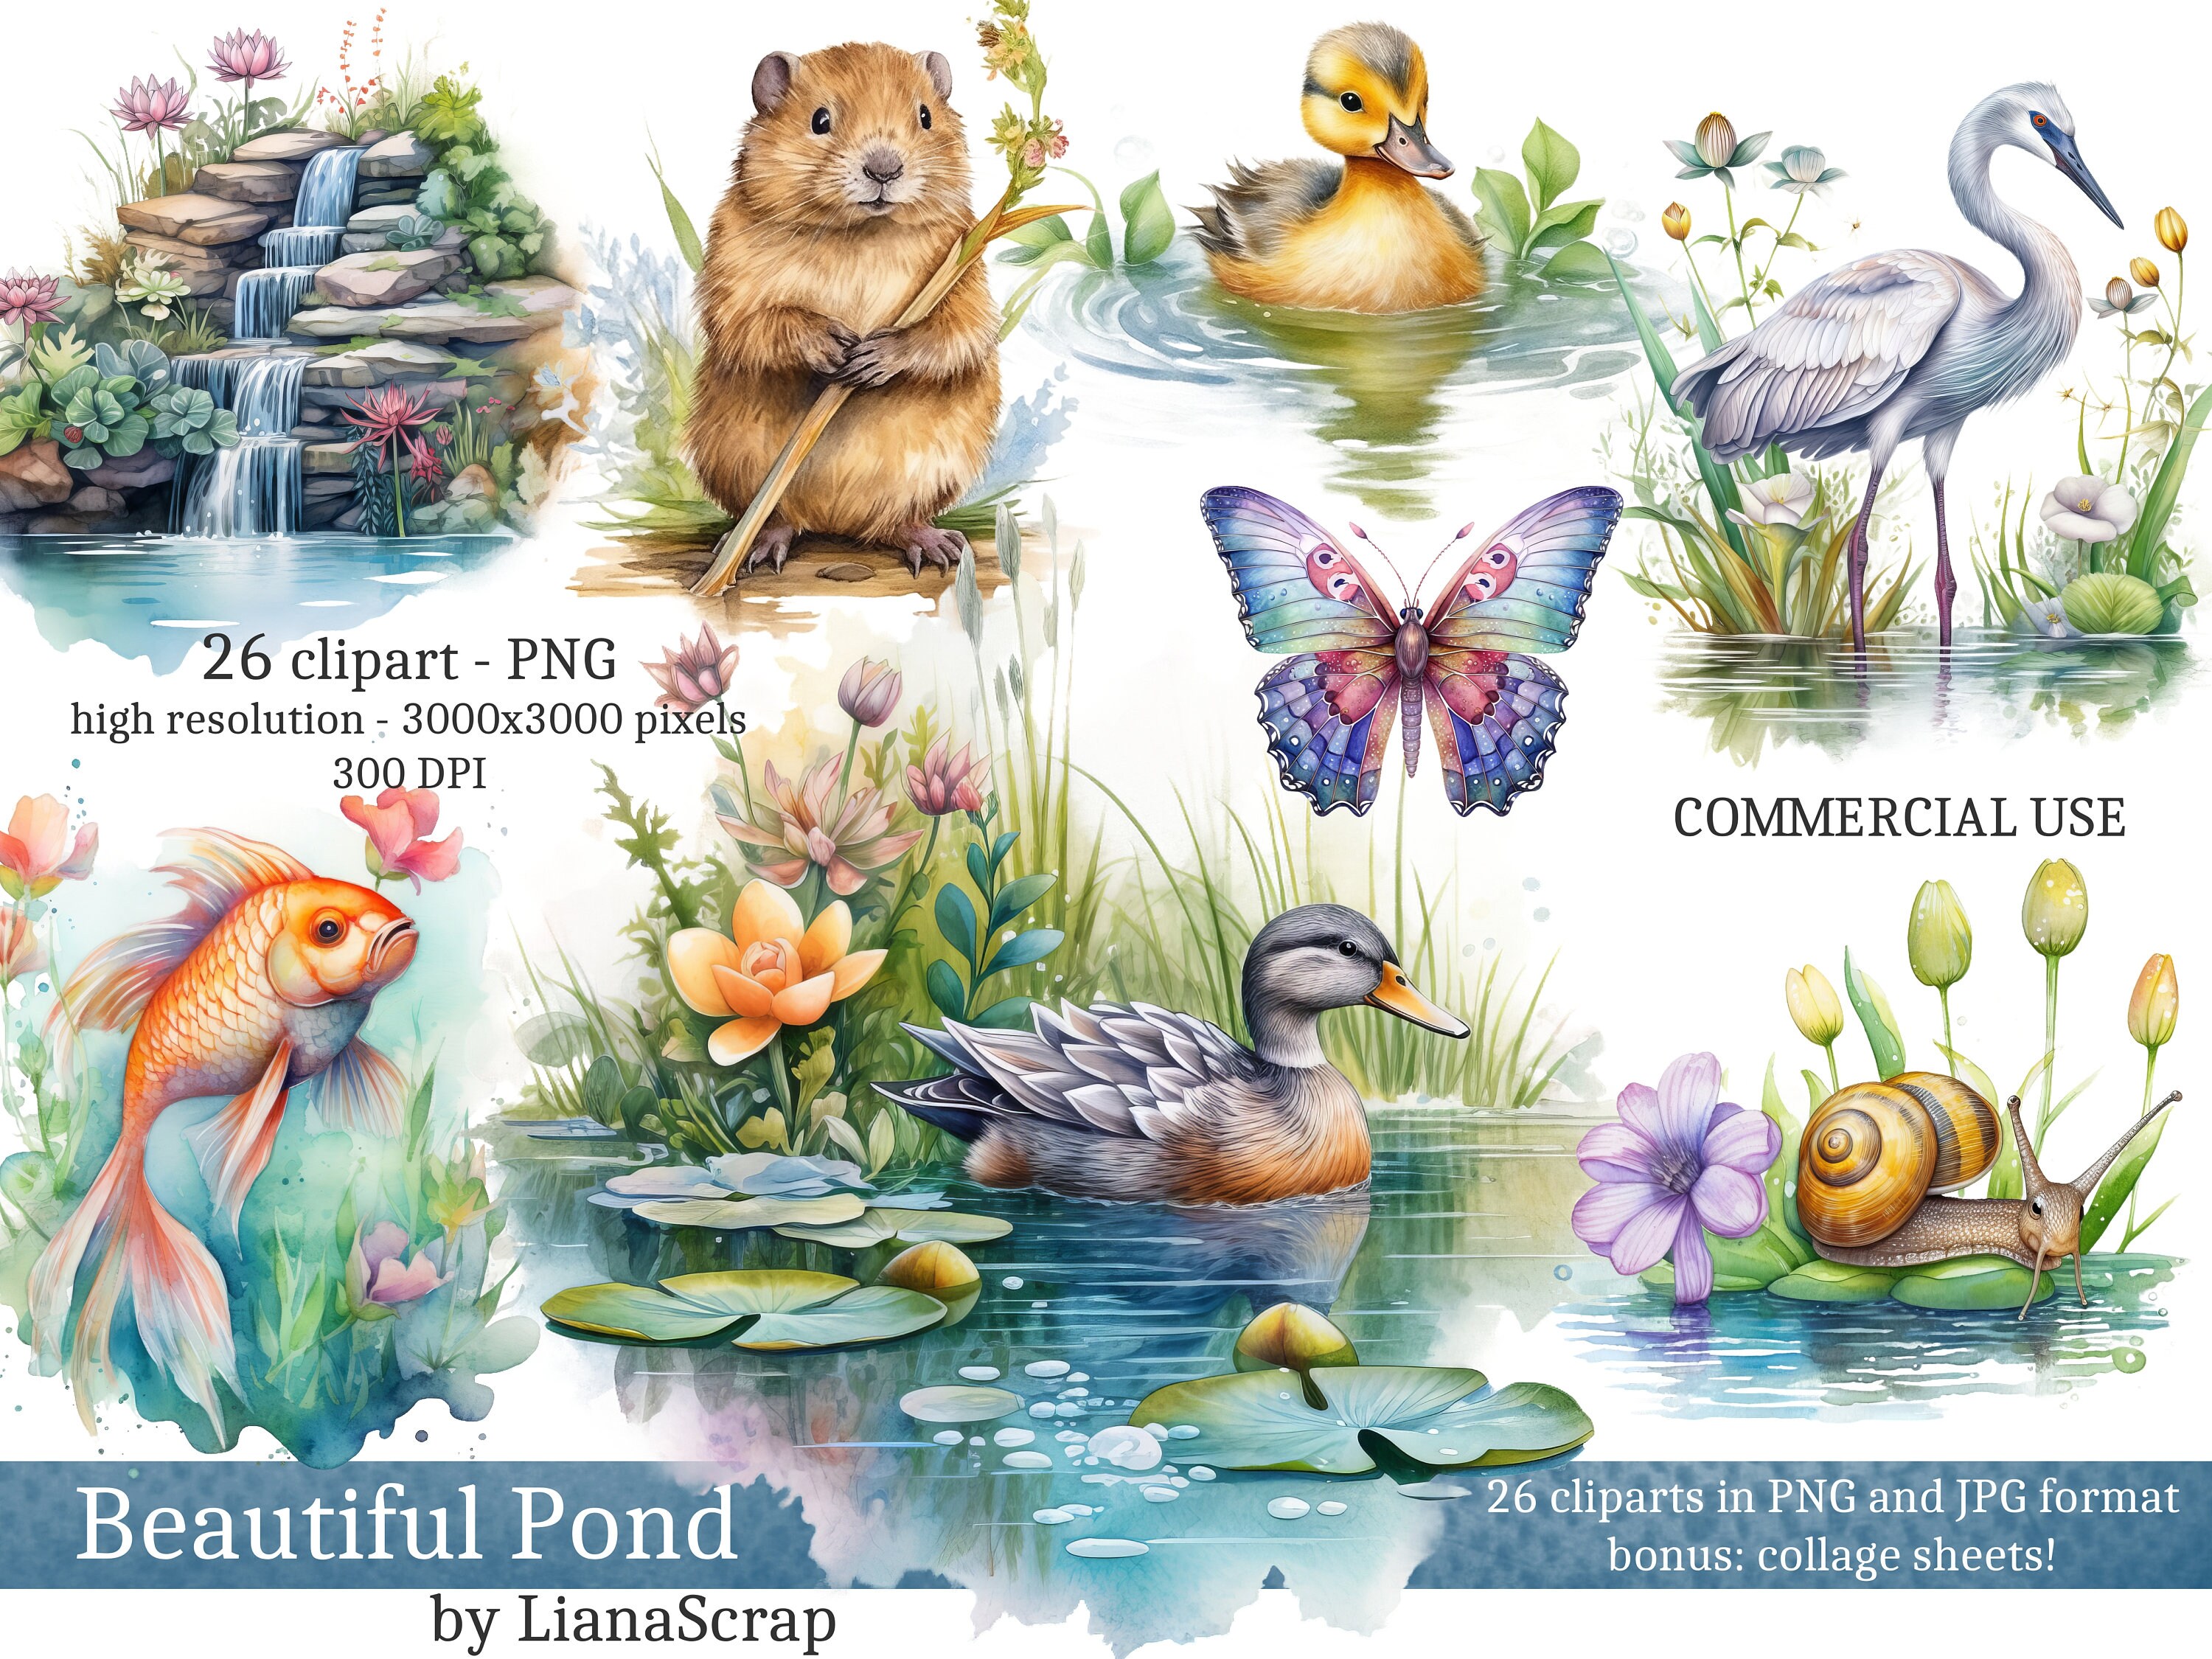 Beautiful Pond Clipart PNG Set 26 Pond Clipart Commercial picture picture